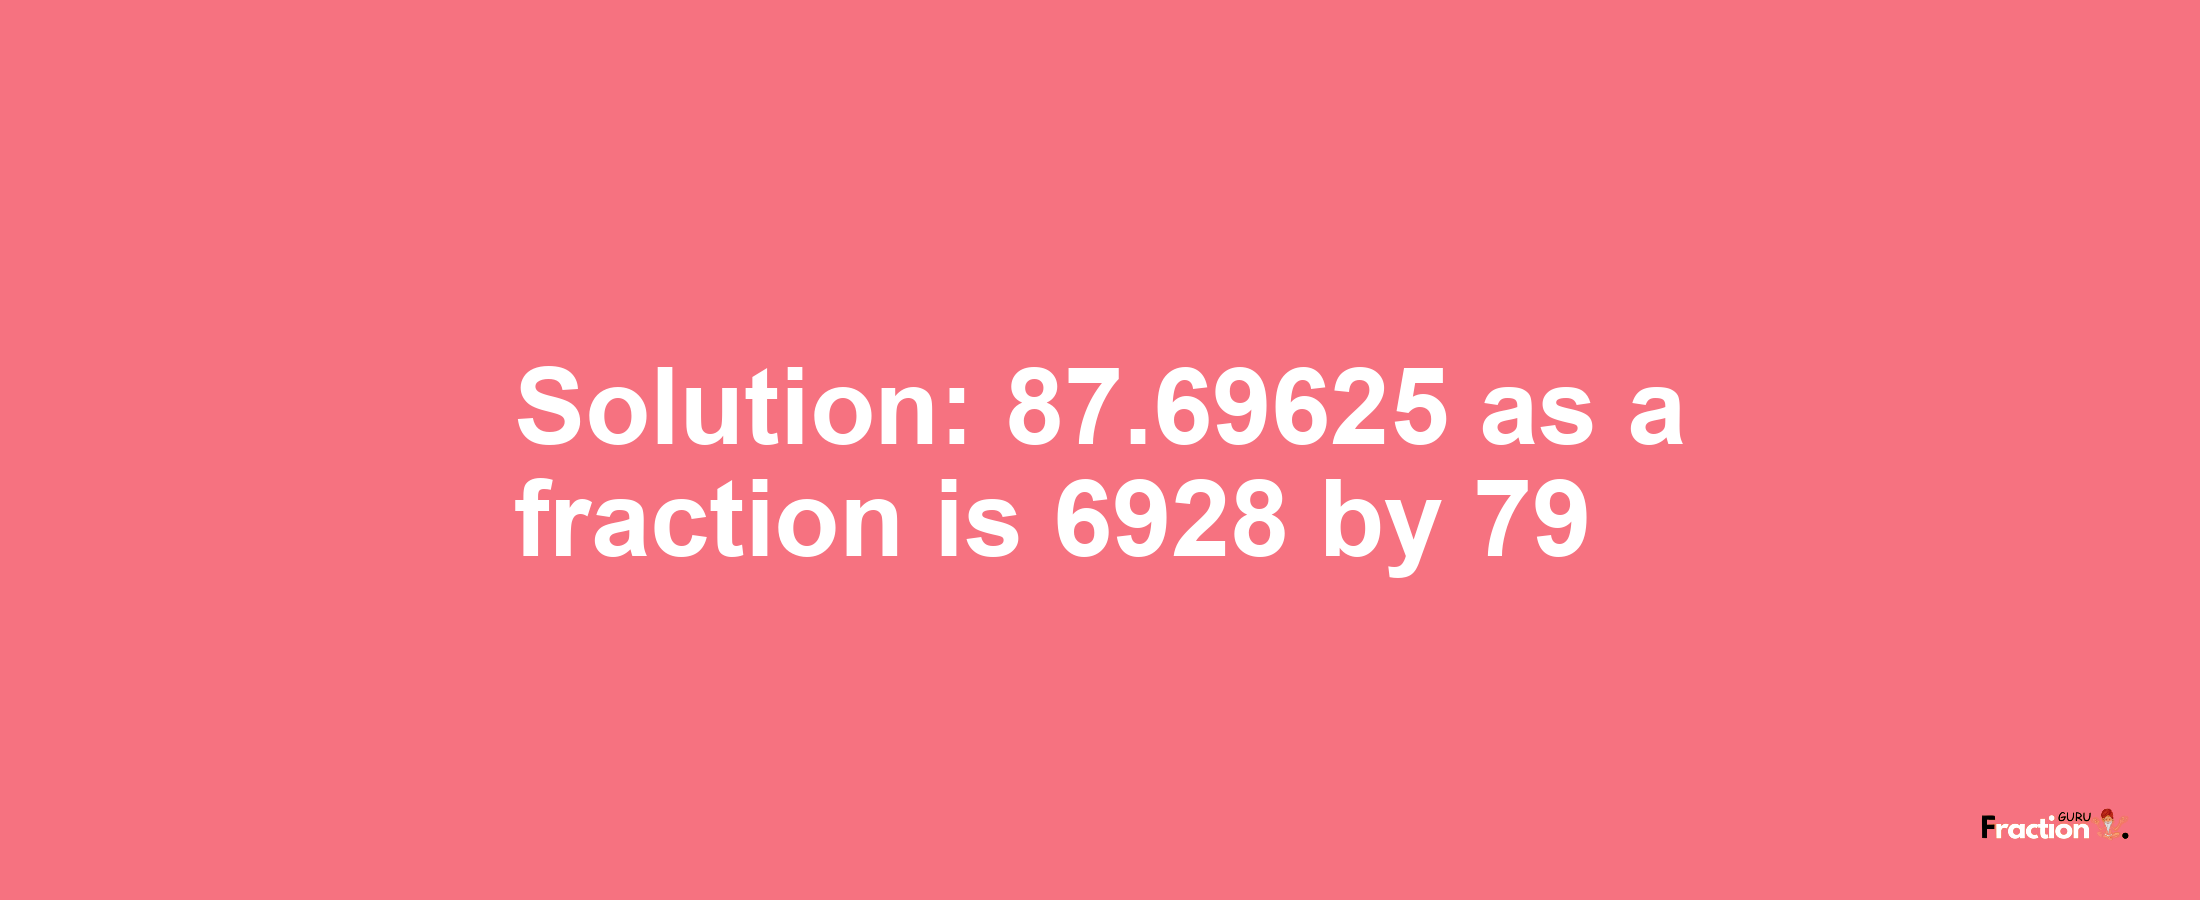 Solution:87.69625 as a fraction is 6928/79